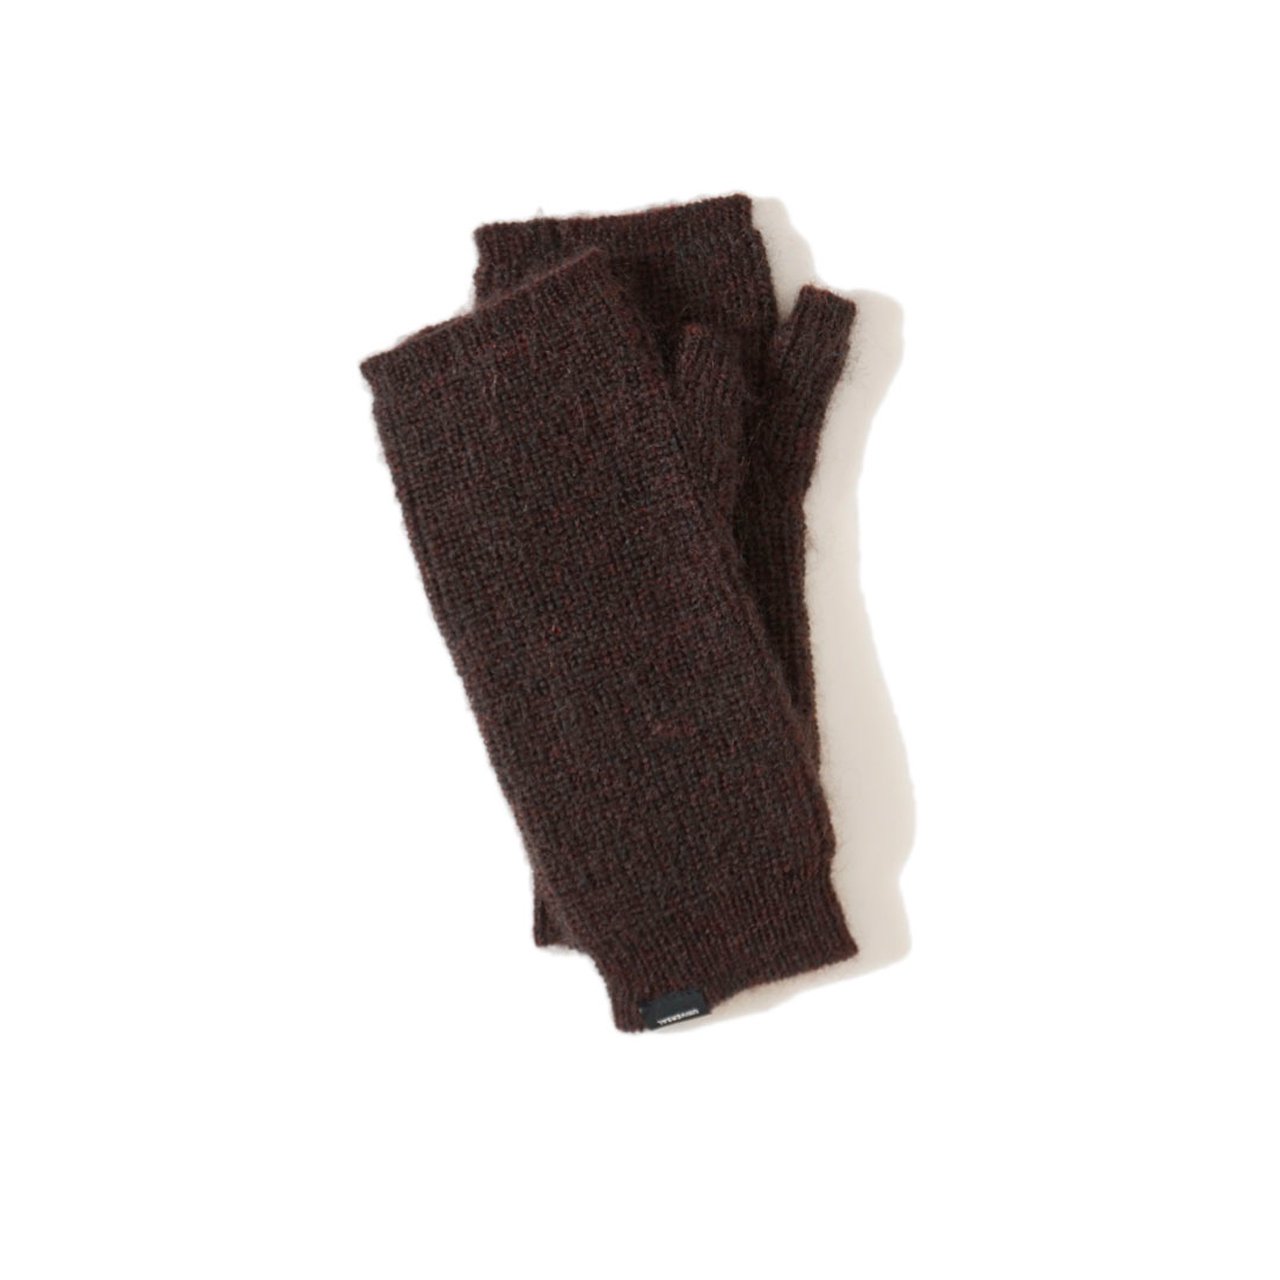 UNIVERSAL PRODUCTS (ユニバーサルプロダクツ) WOOL MOHAIR KNIT GLOVE 